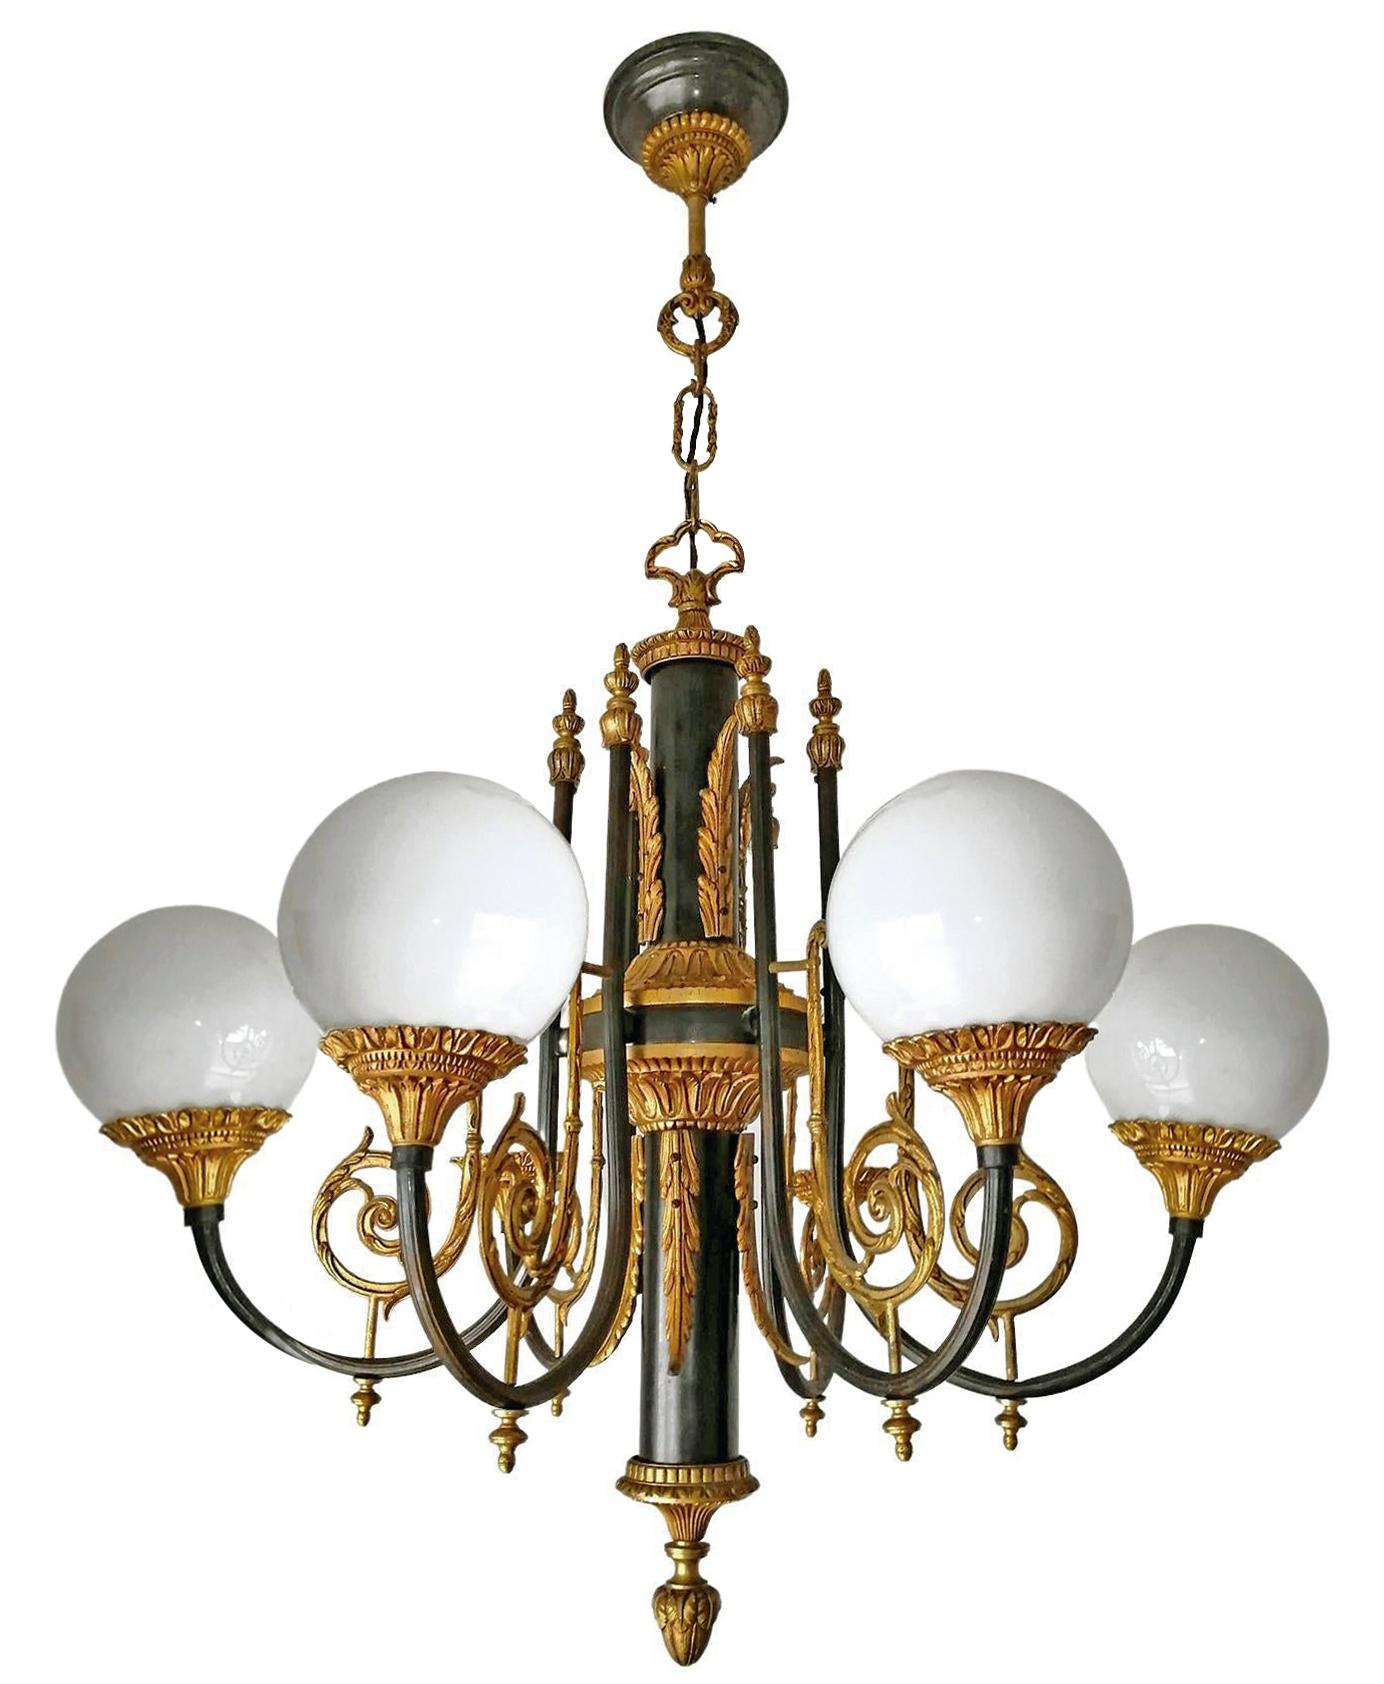 Pair of Antique French Empire Neoclassical Chandelier w Gilt & Patina Bronze PPU For Sale 6